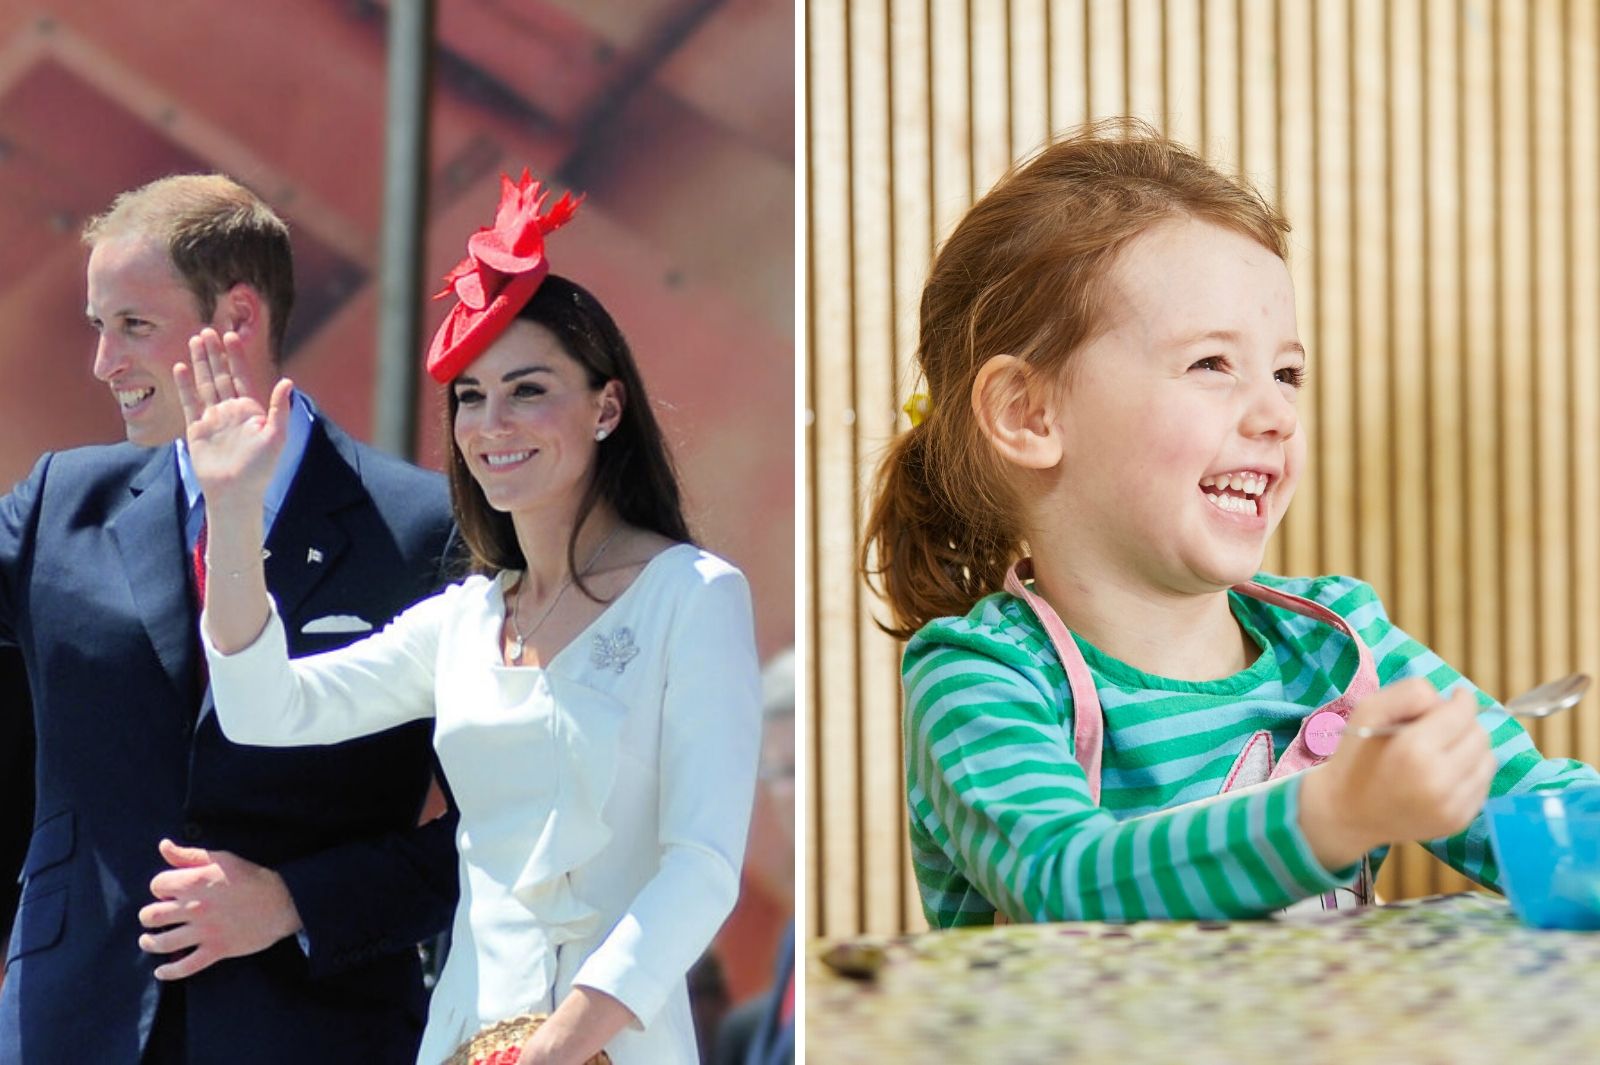 Image Duke and Duchess of Cambridge and a child